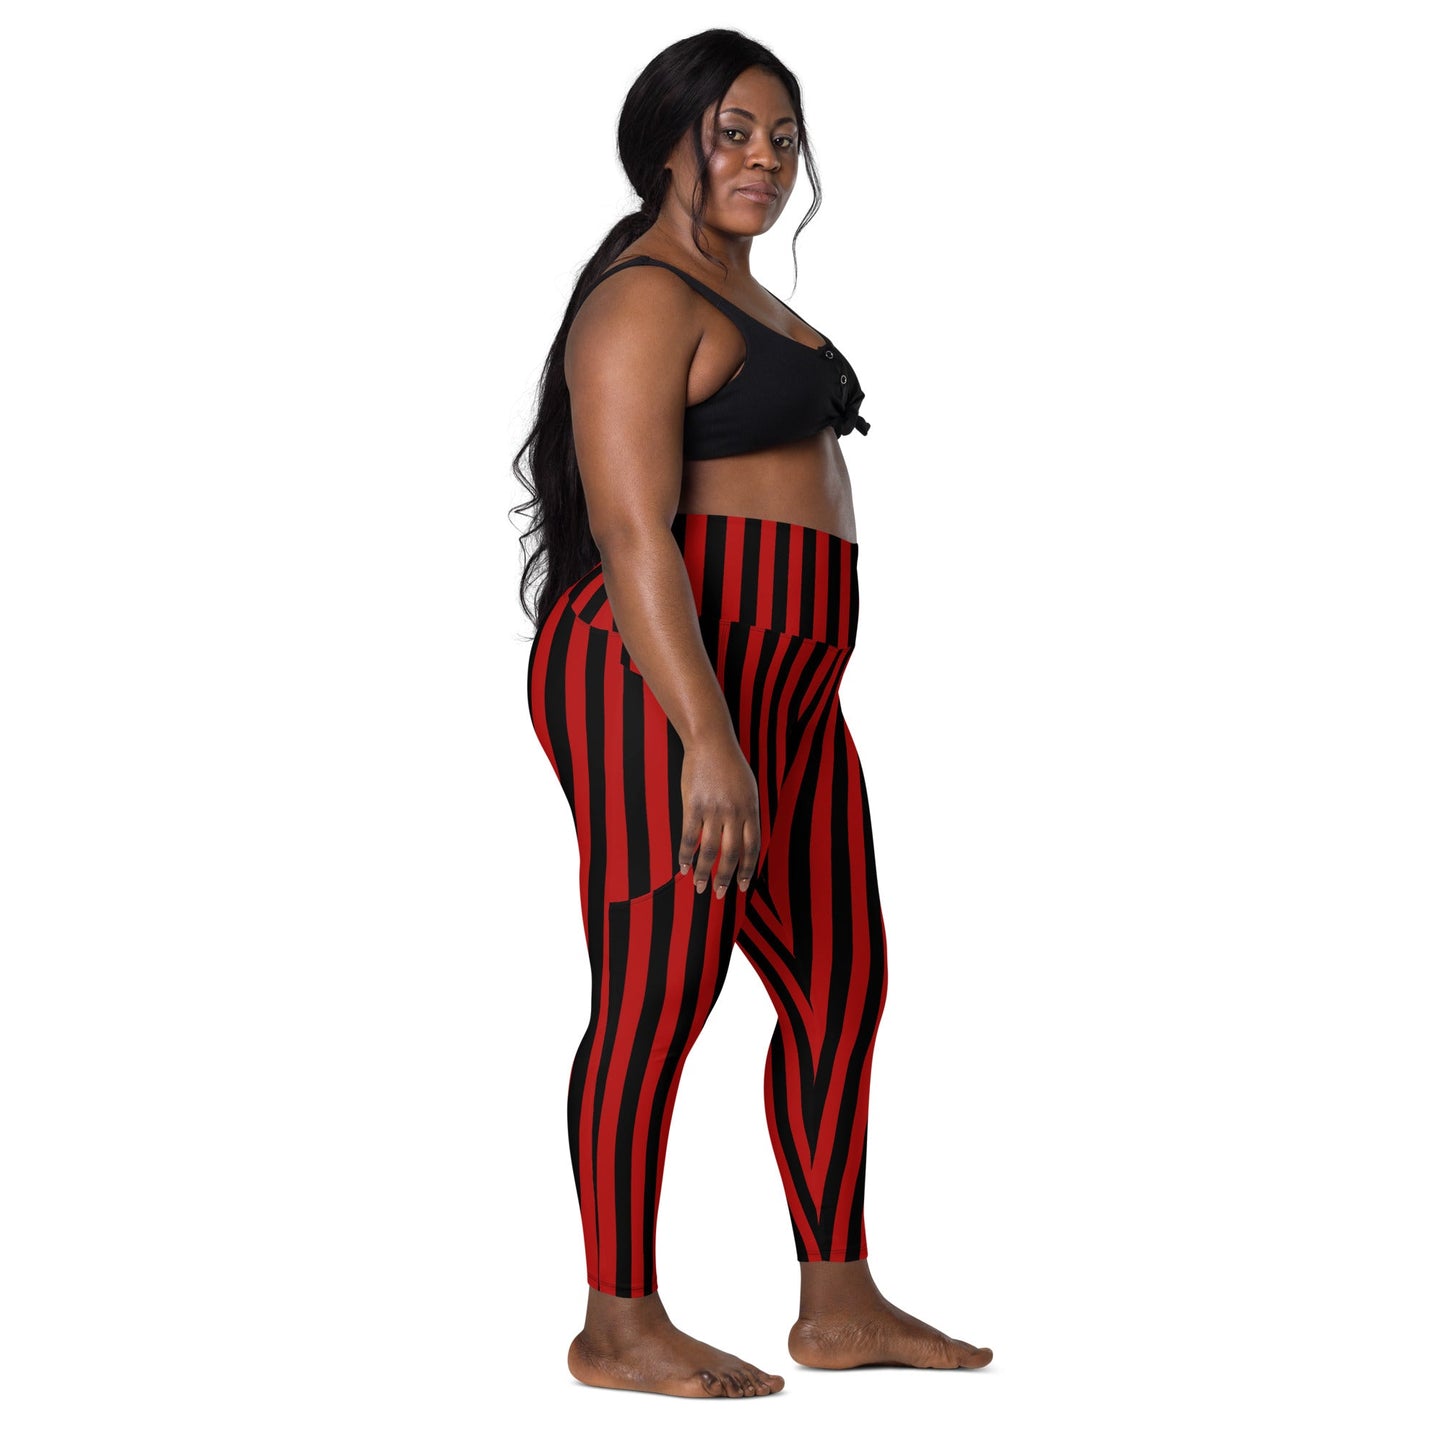 Pirate Leggings with pockets beach stylecruise fitcruise style#tag4##tag5##tag6#